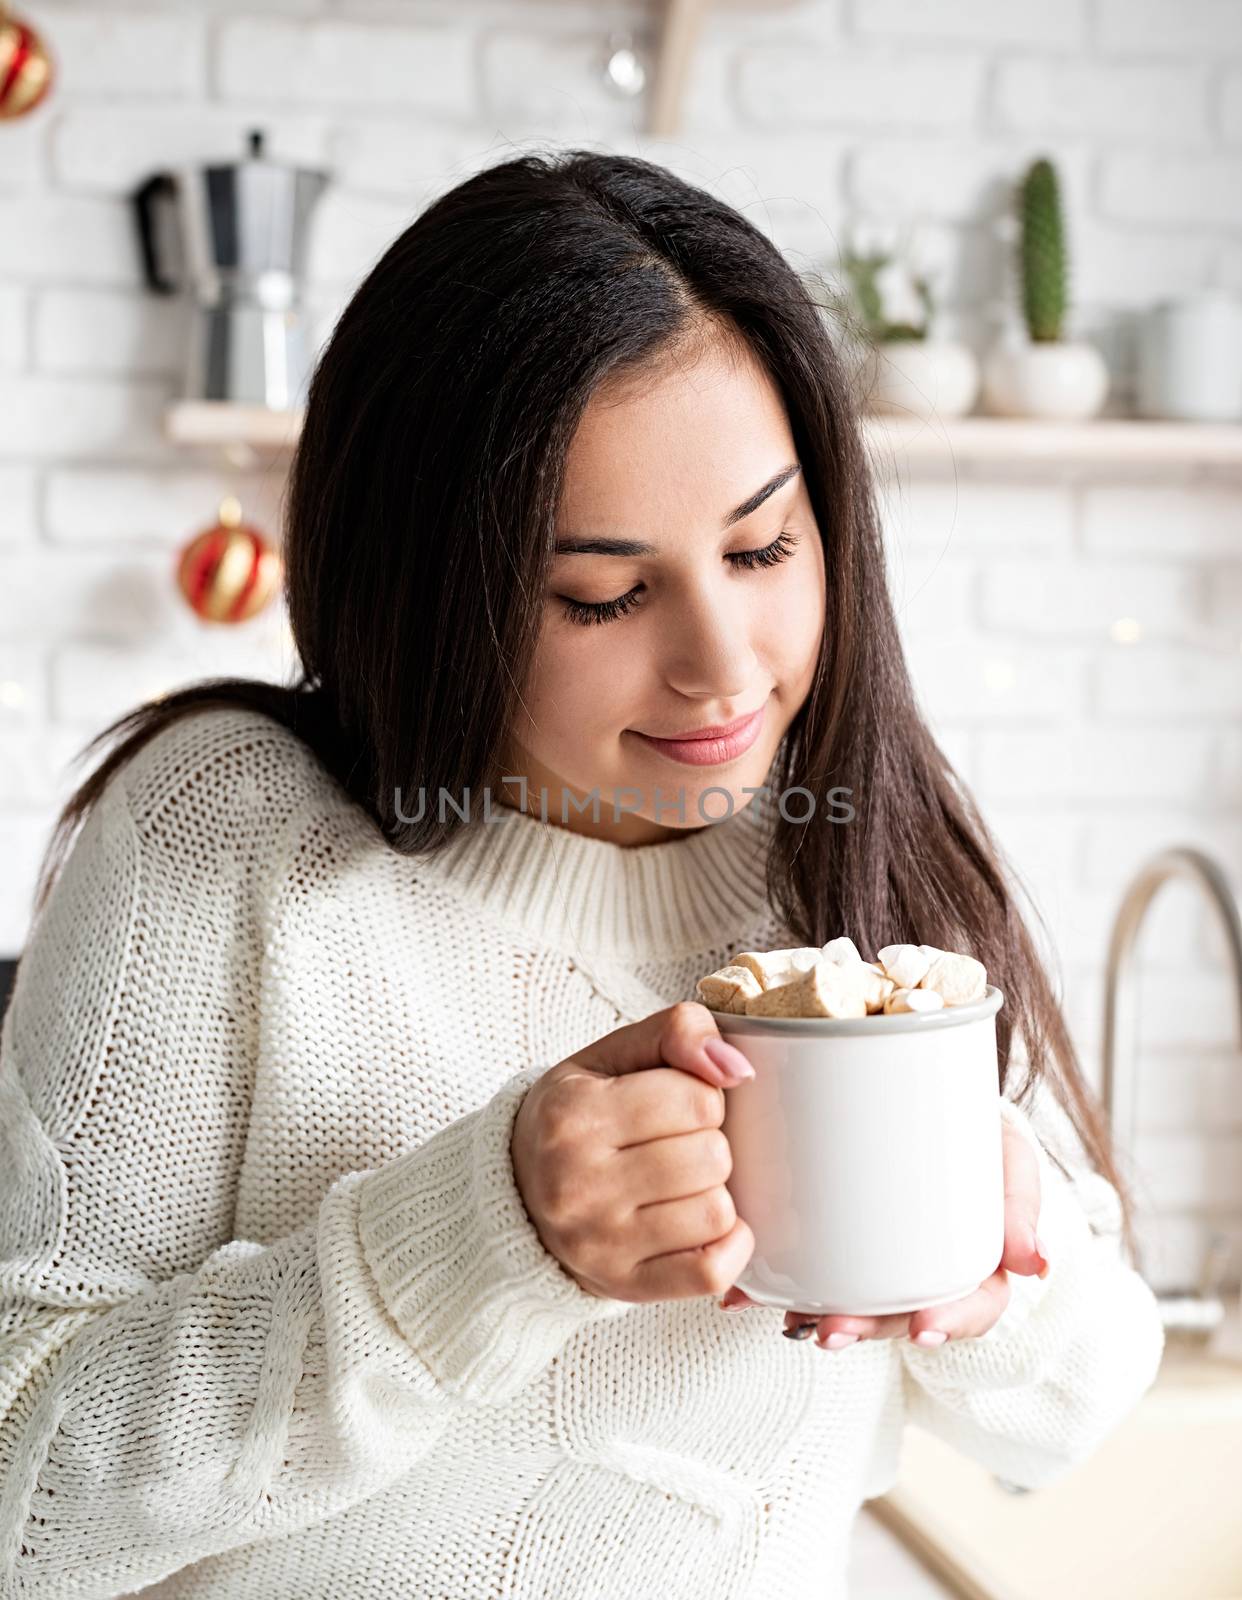 Brunette woman holding a cup of marshmallow cocoa in the kitchen by Desperada